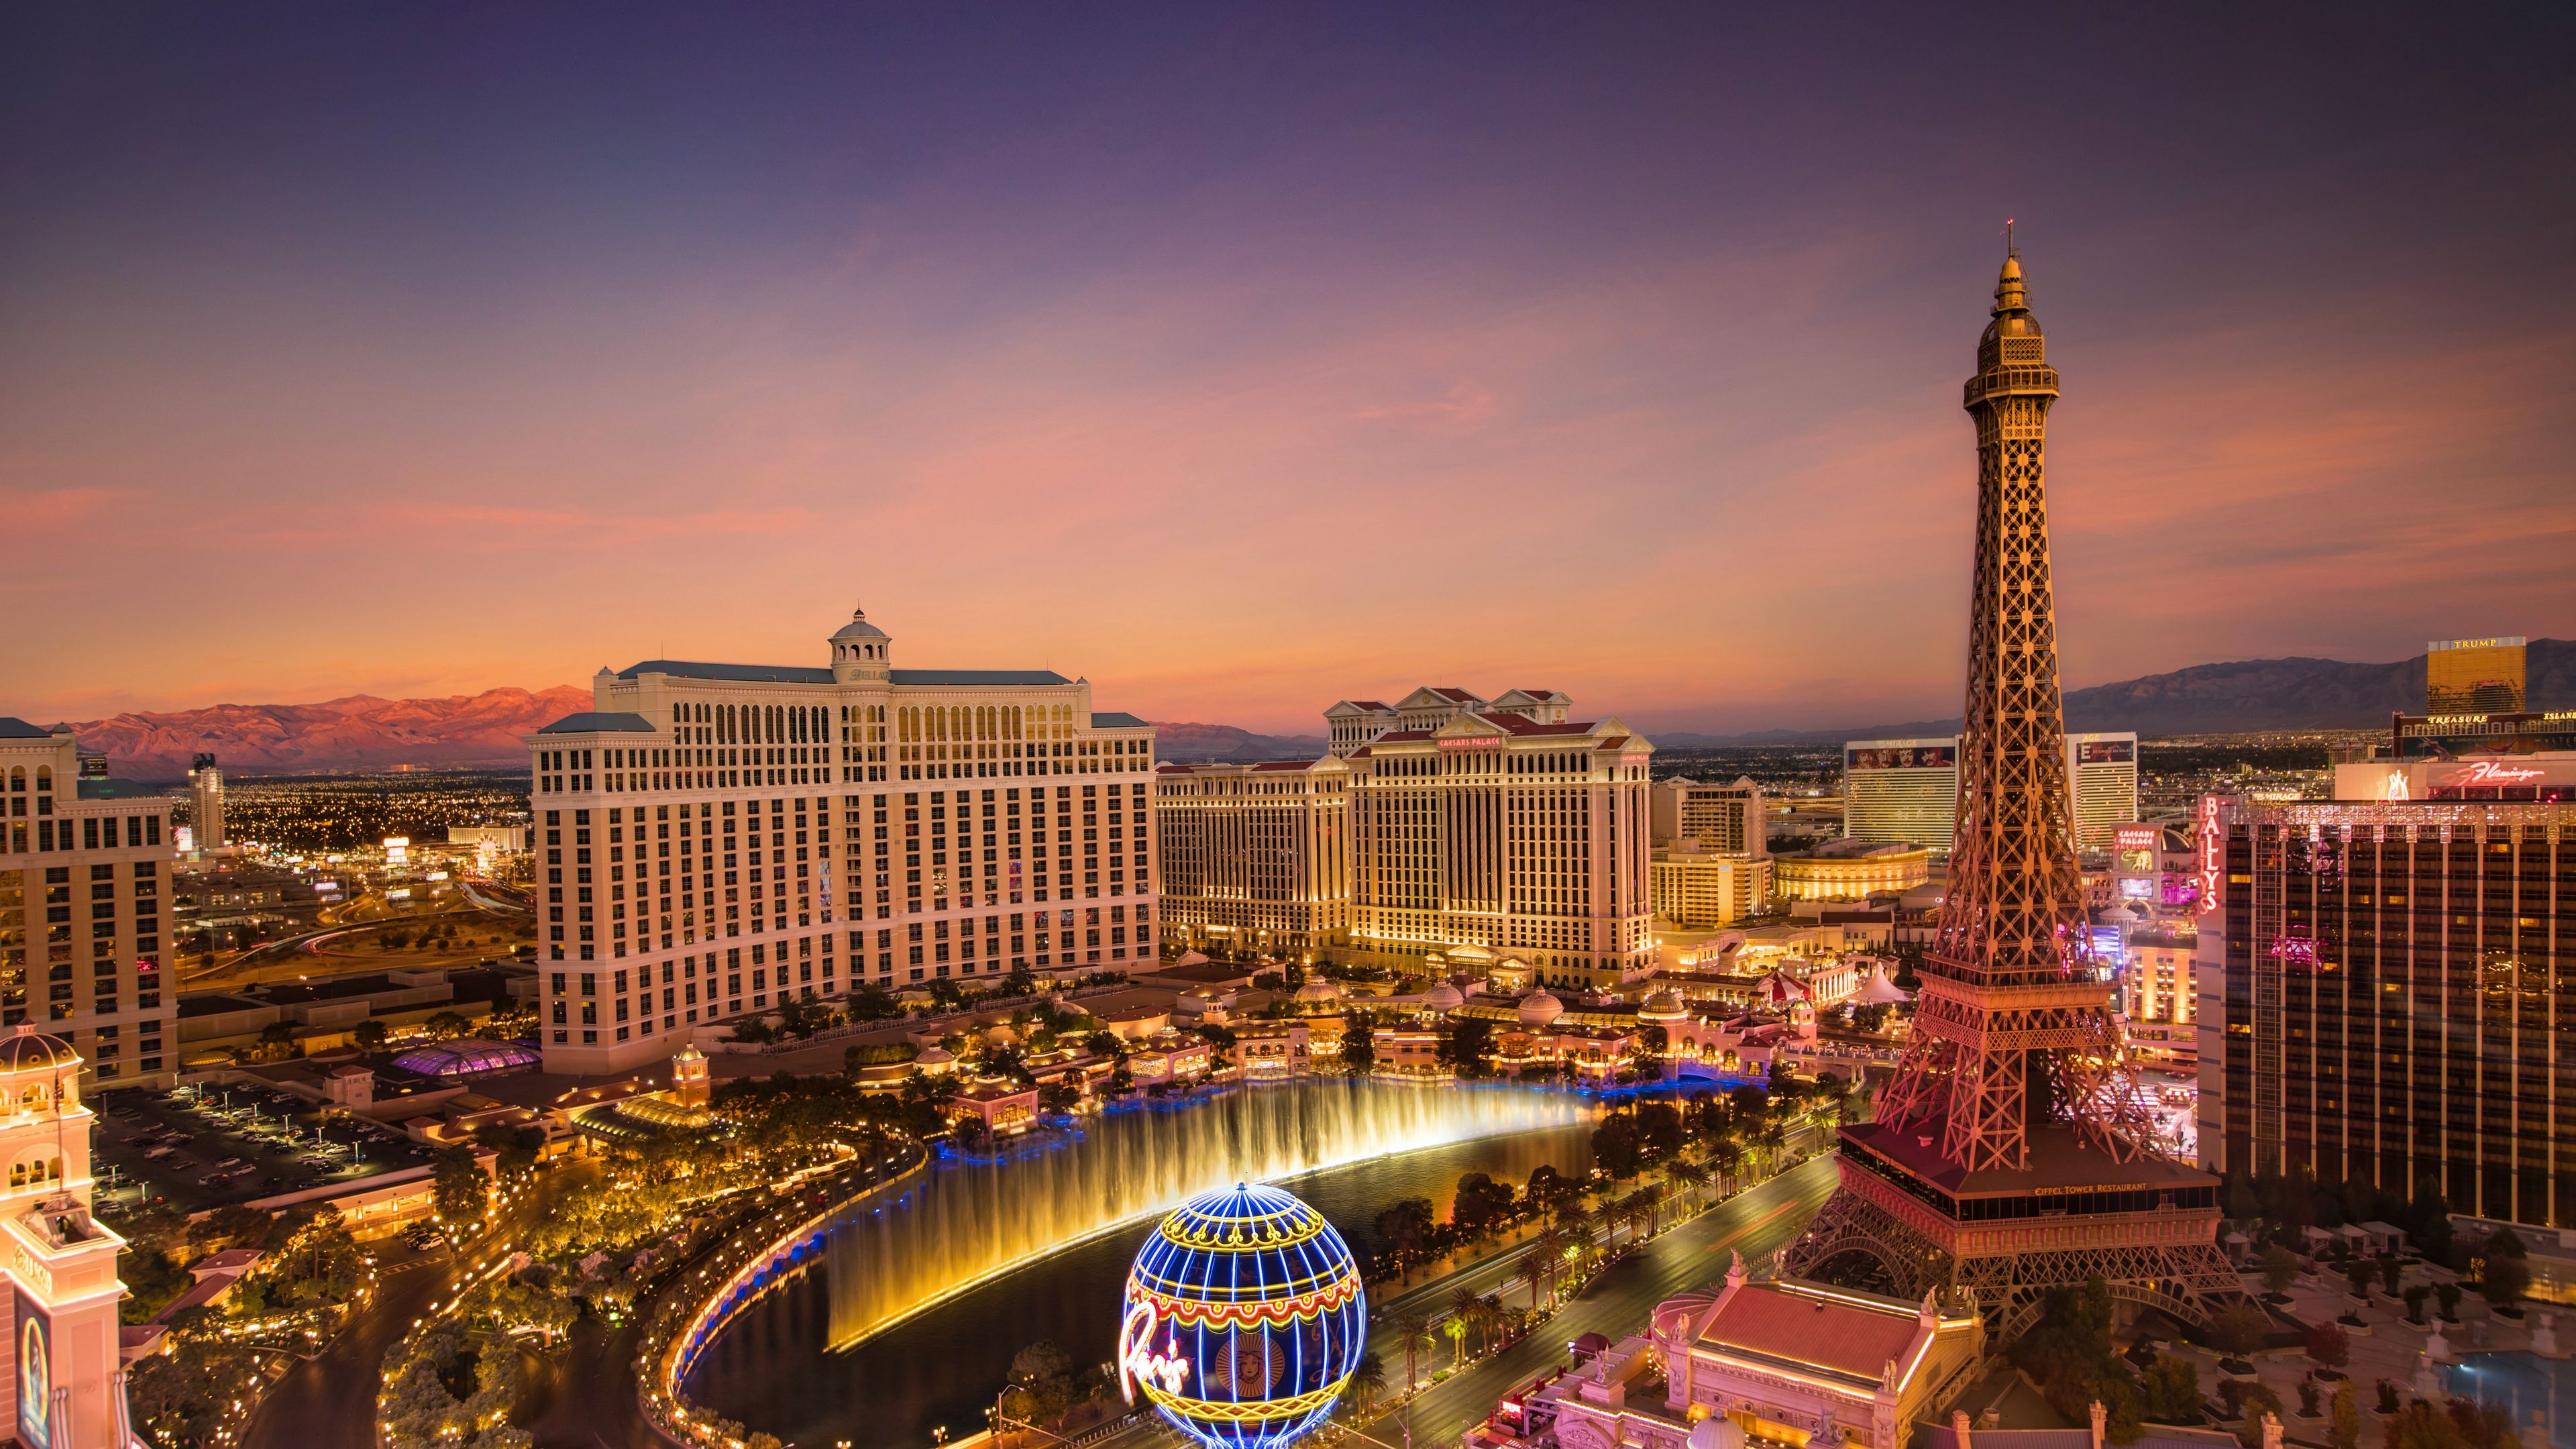 Vegas 4k Wallpapers For Your Desktop Or Mobile Screen Free And Easy To Download